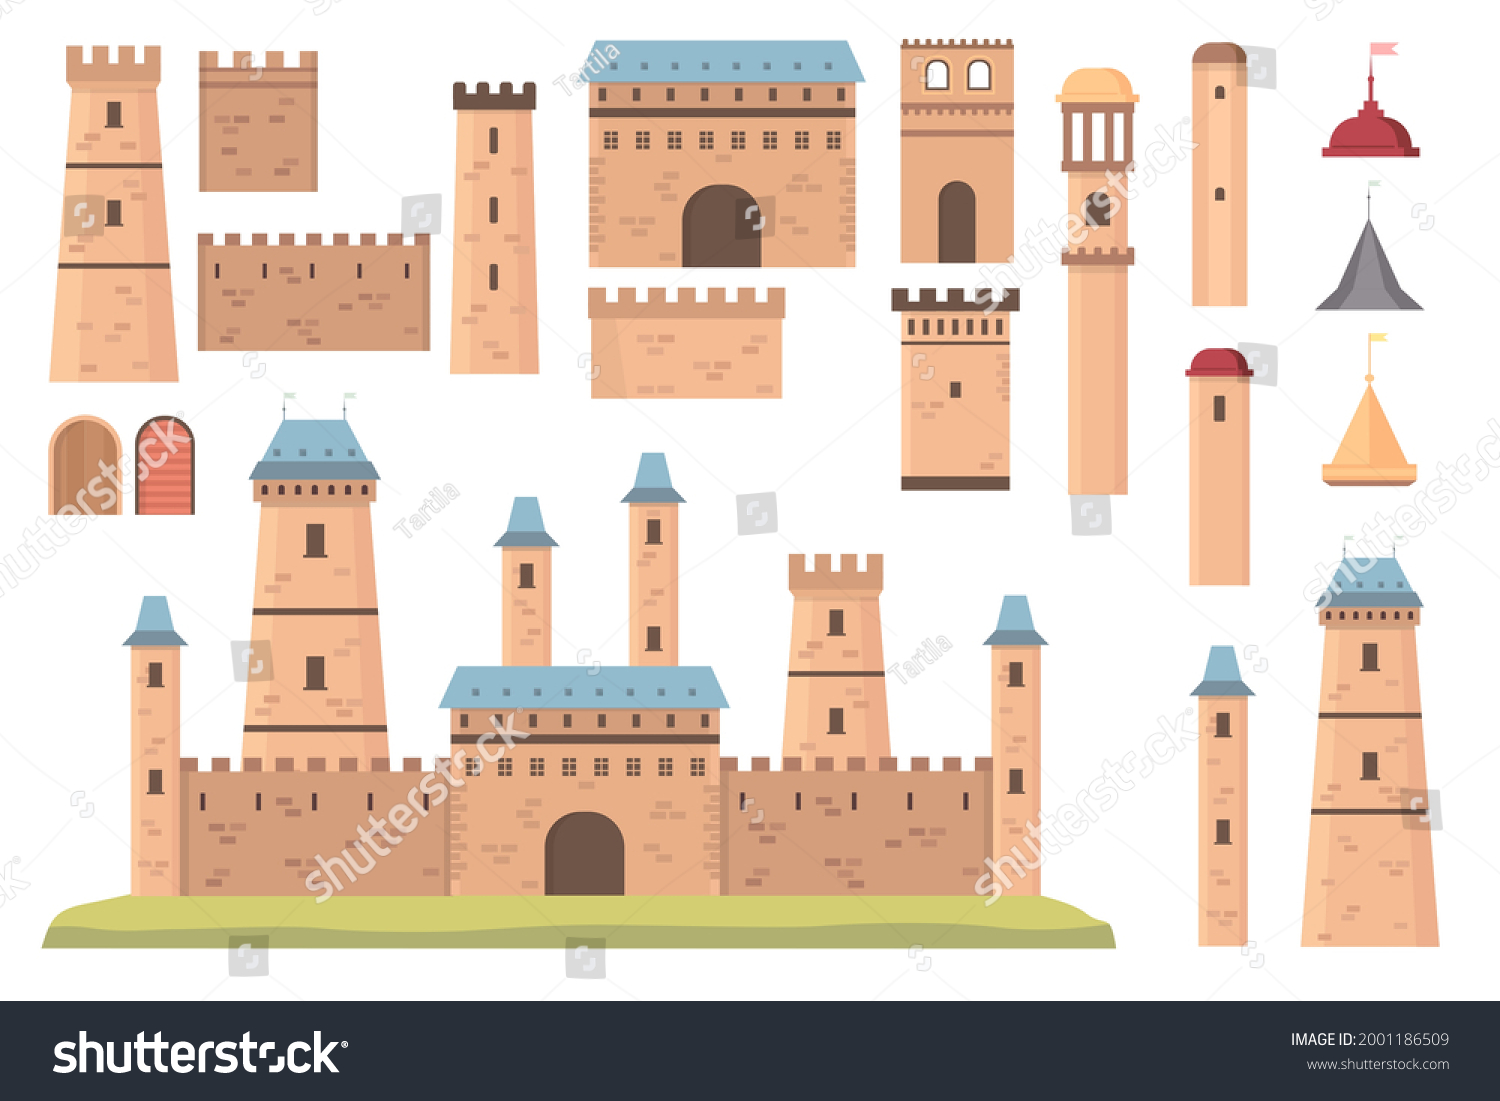 SVG of Castle constructor. Medieval architecture, towers with flags, walls and doors. Old historical bastion building, fortress vector set. Architecture castle, tower and stronghold construction illustration svg